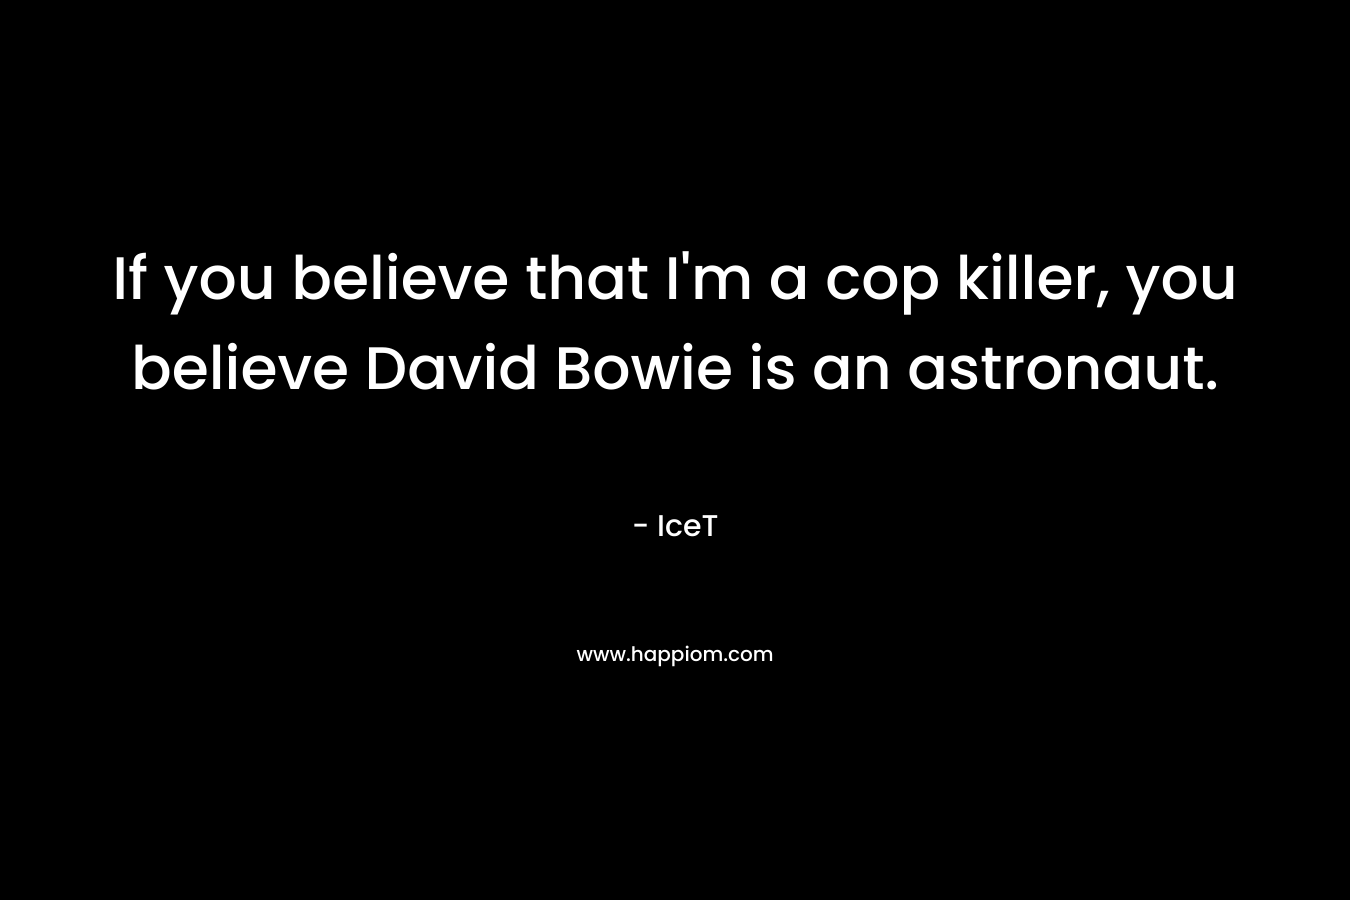 If you believe that I’m a cop killer, you believe David Bowie is an astronaut. – IceT